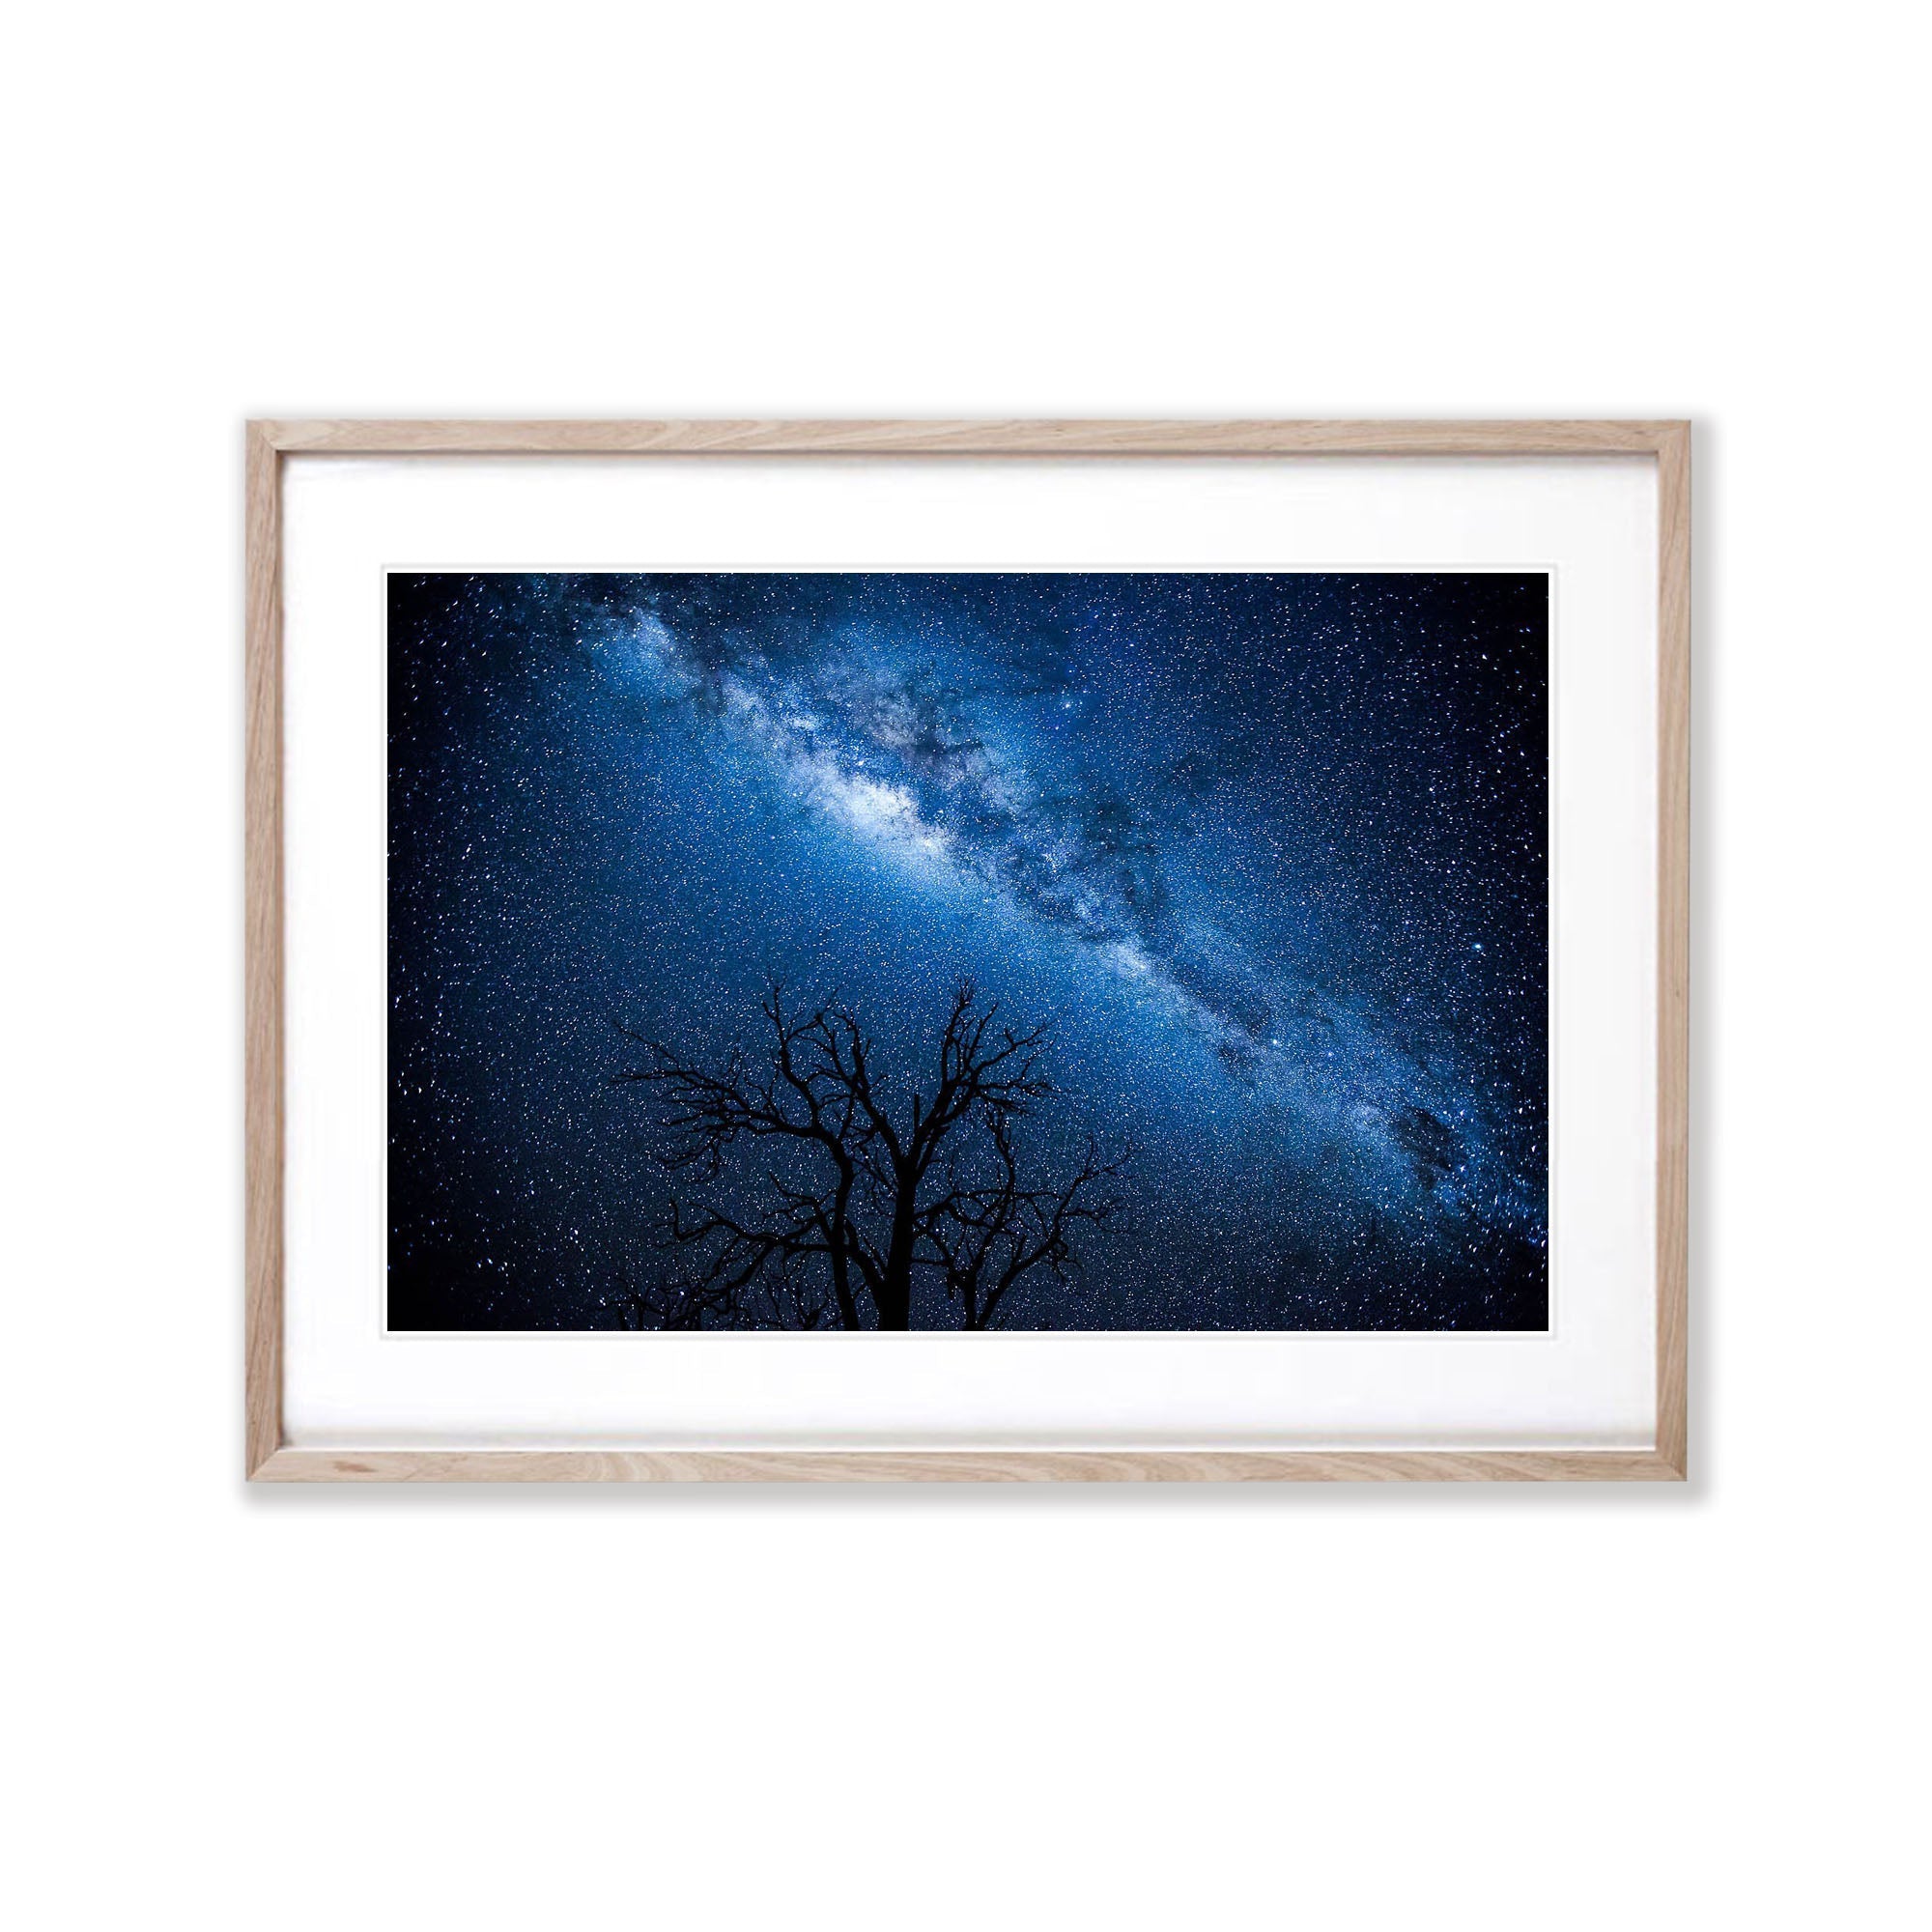 Milky Way, West MacDonnell Ranges - Northern Territory